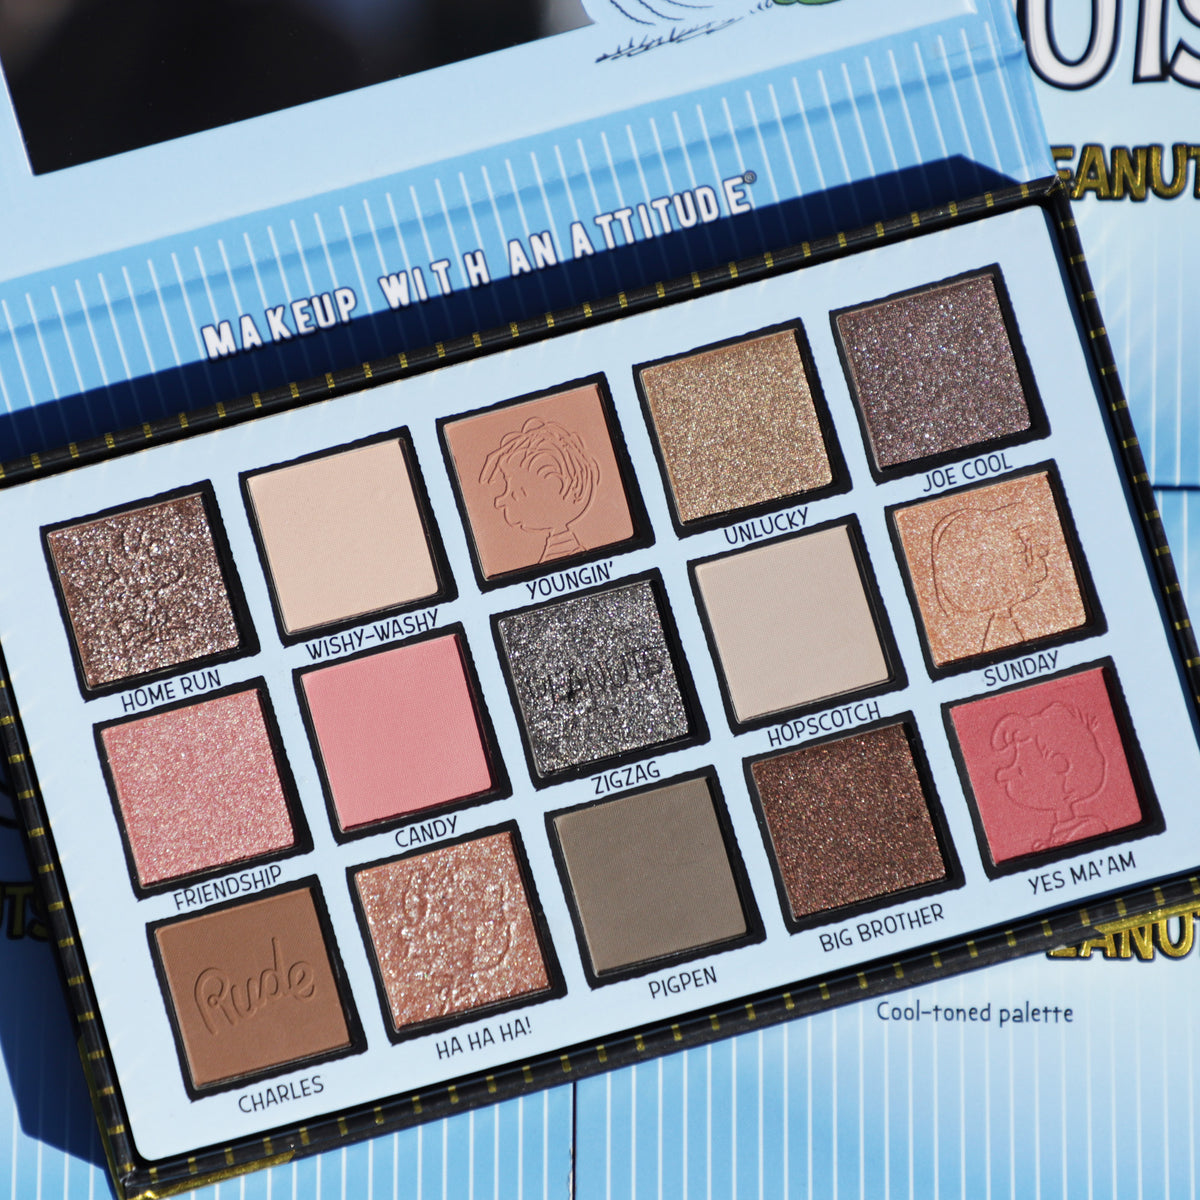 Shades of Peanuts Eyeshadow Palette - Cool-toned